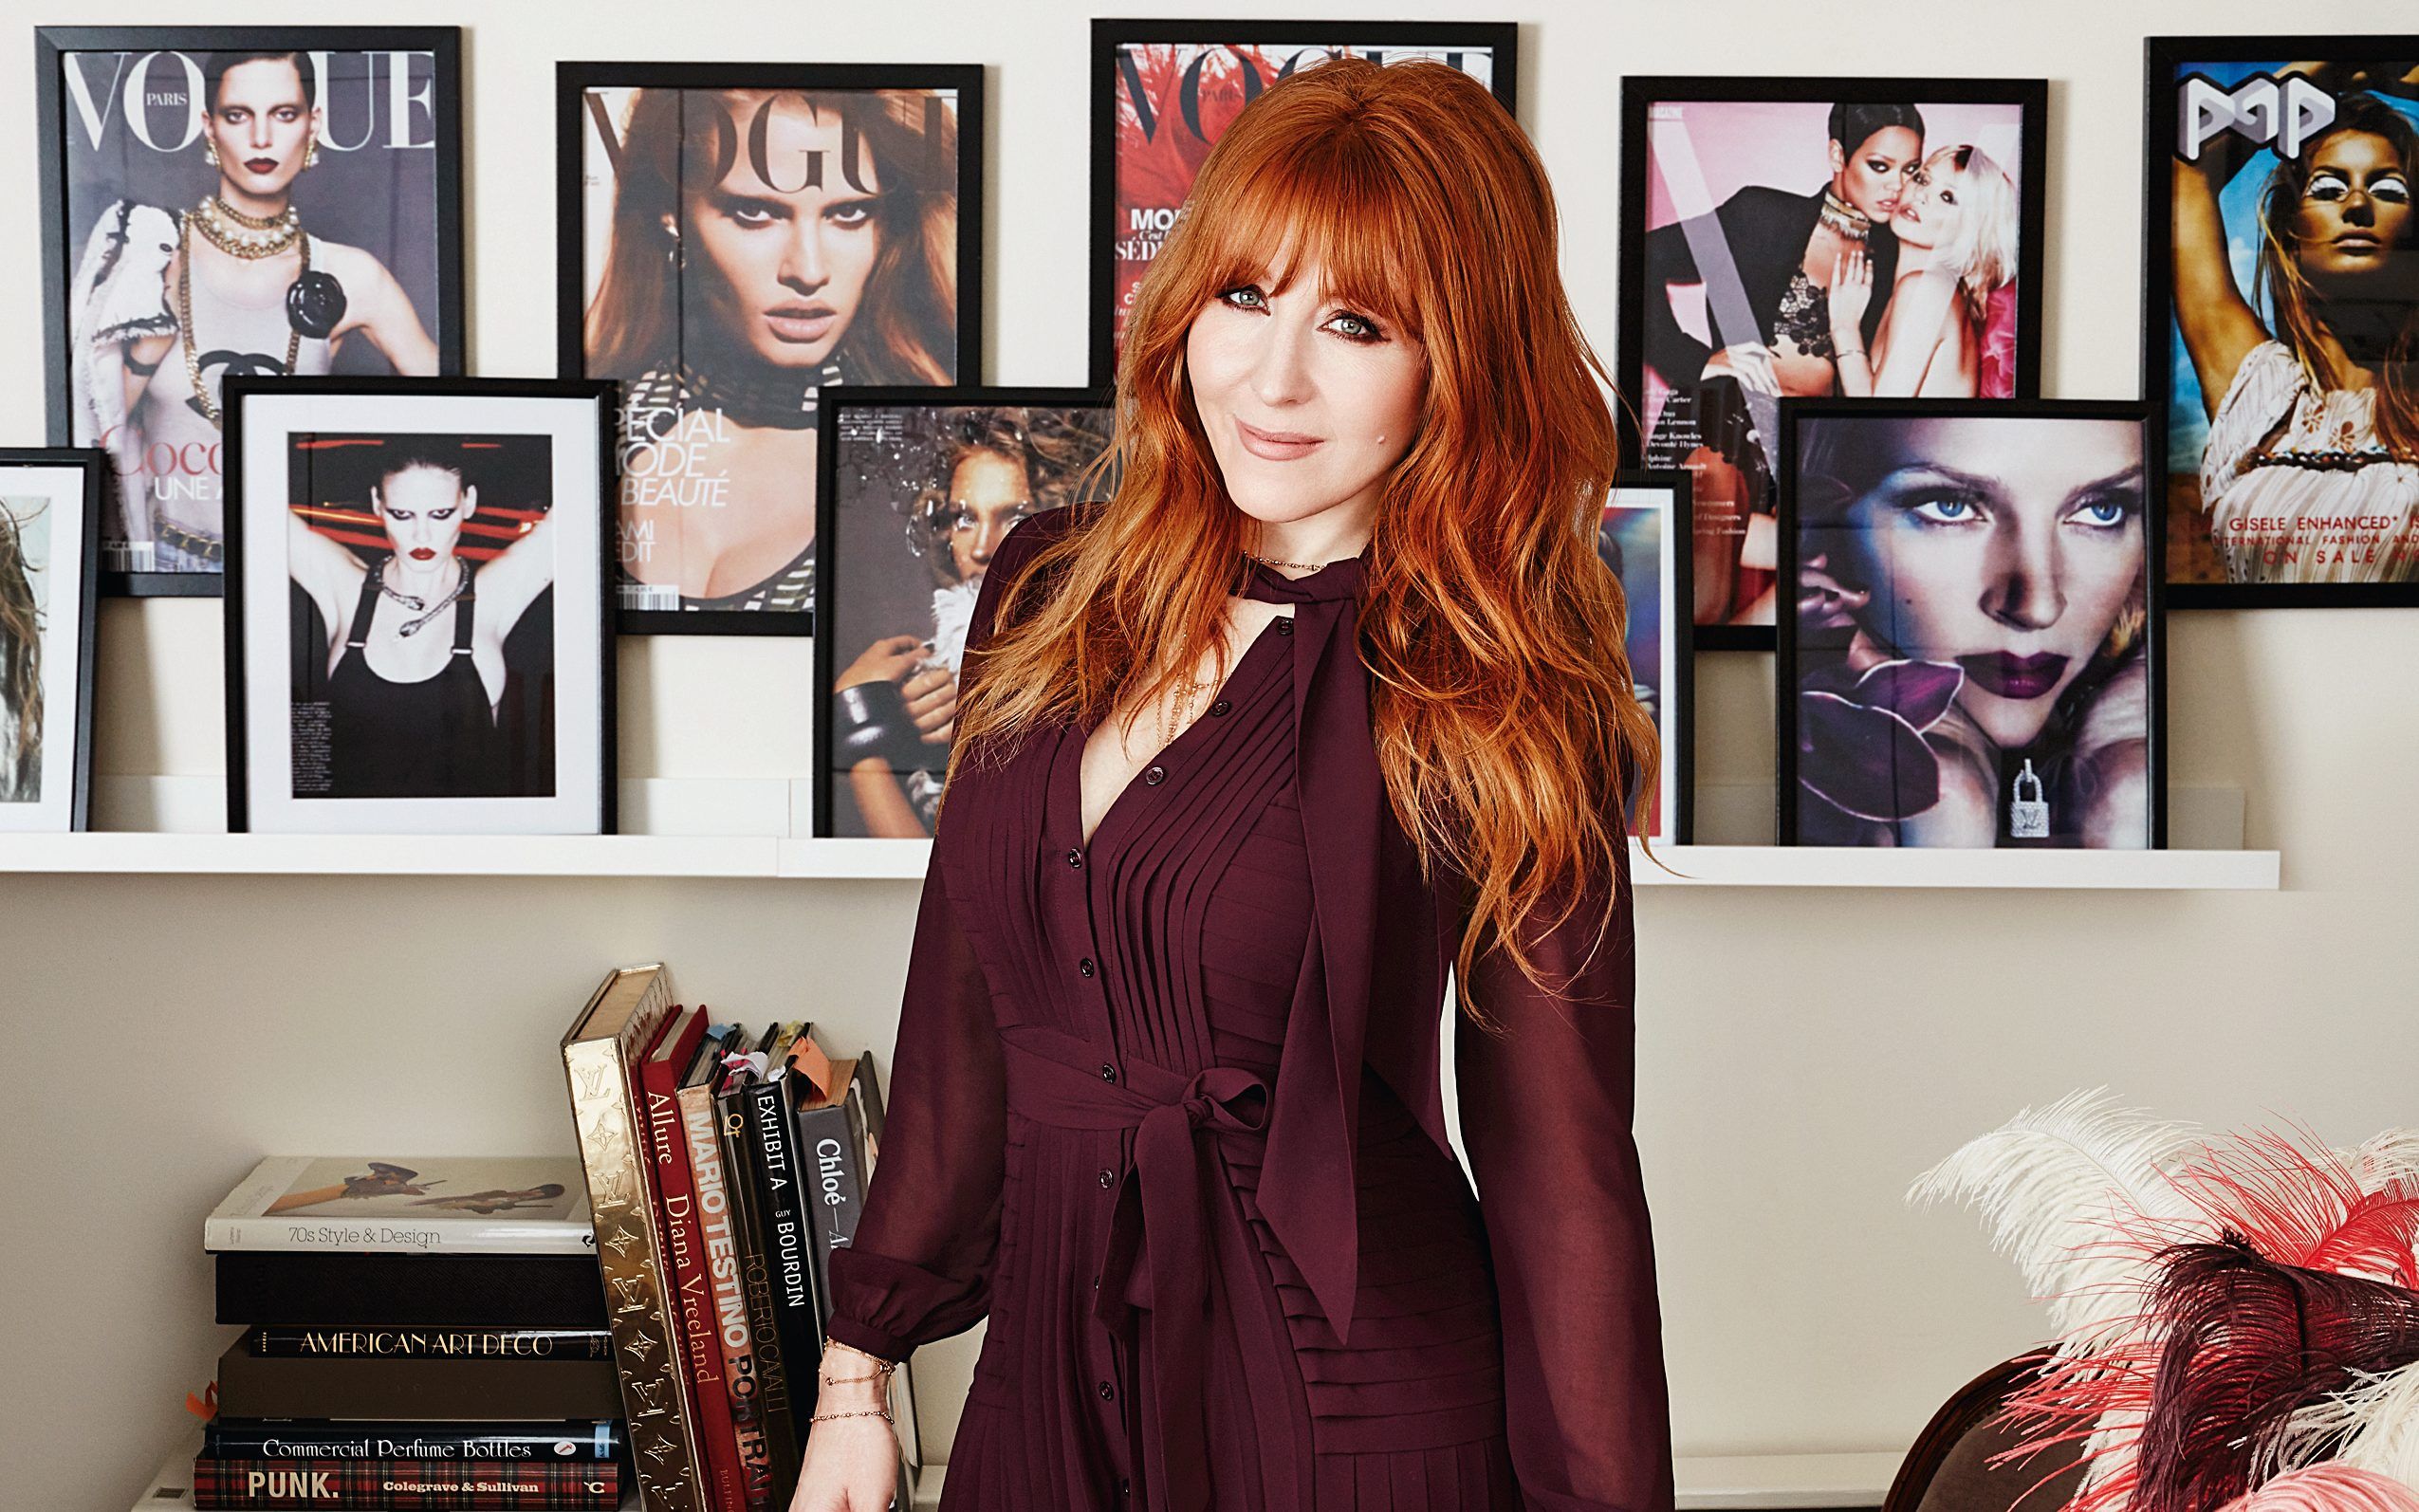 Charlotte Tilbury: “In life you can have it all”